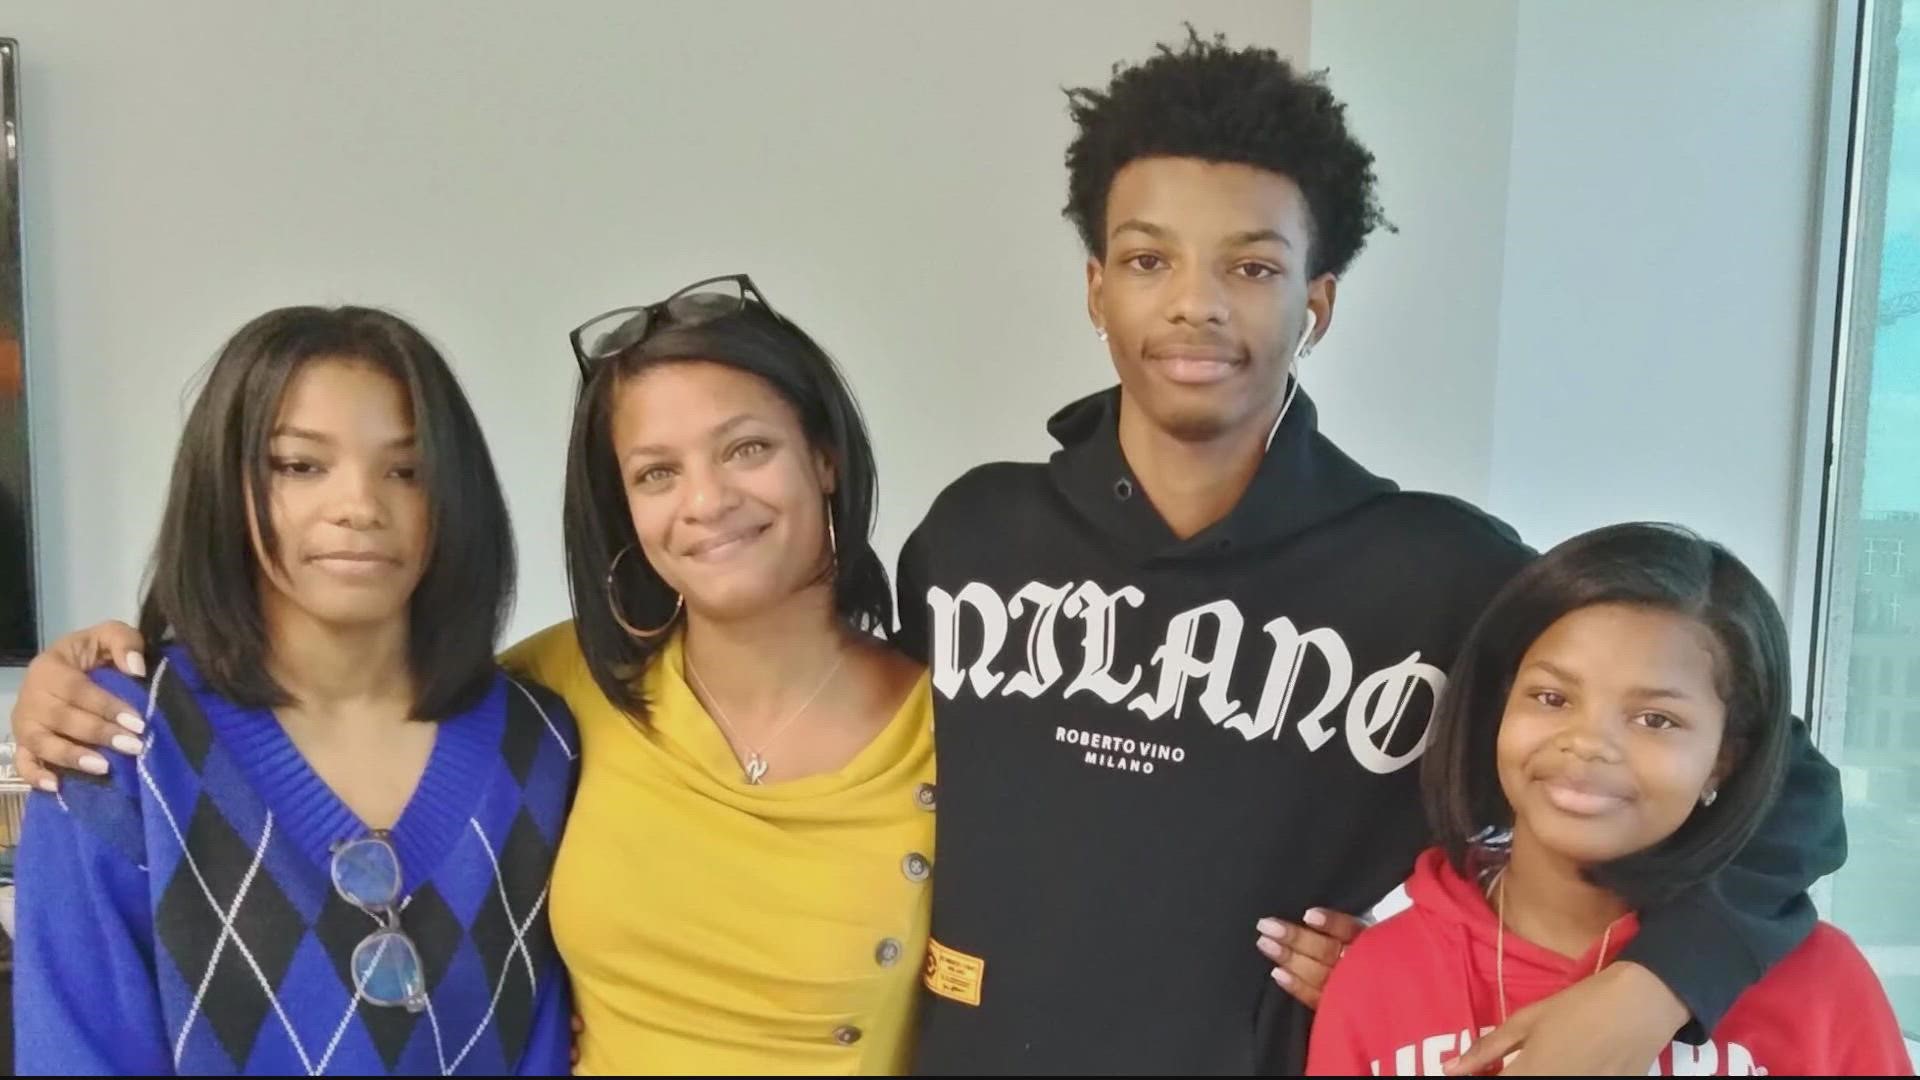 An 18-year-old is awaiting sentencing while the family of the teen he shot sues the school district for removing school resource officers before he was shot.